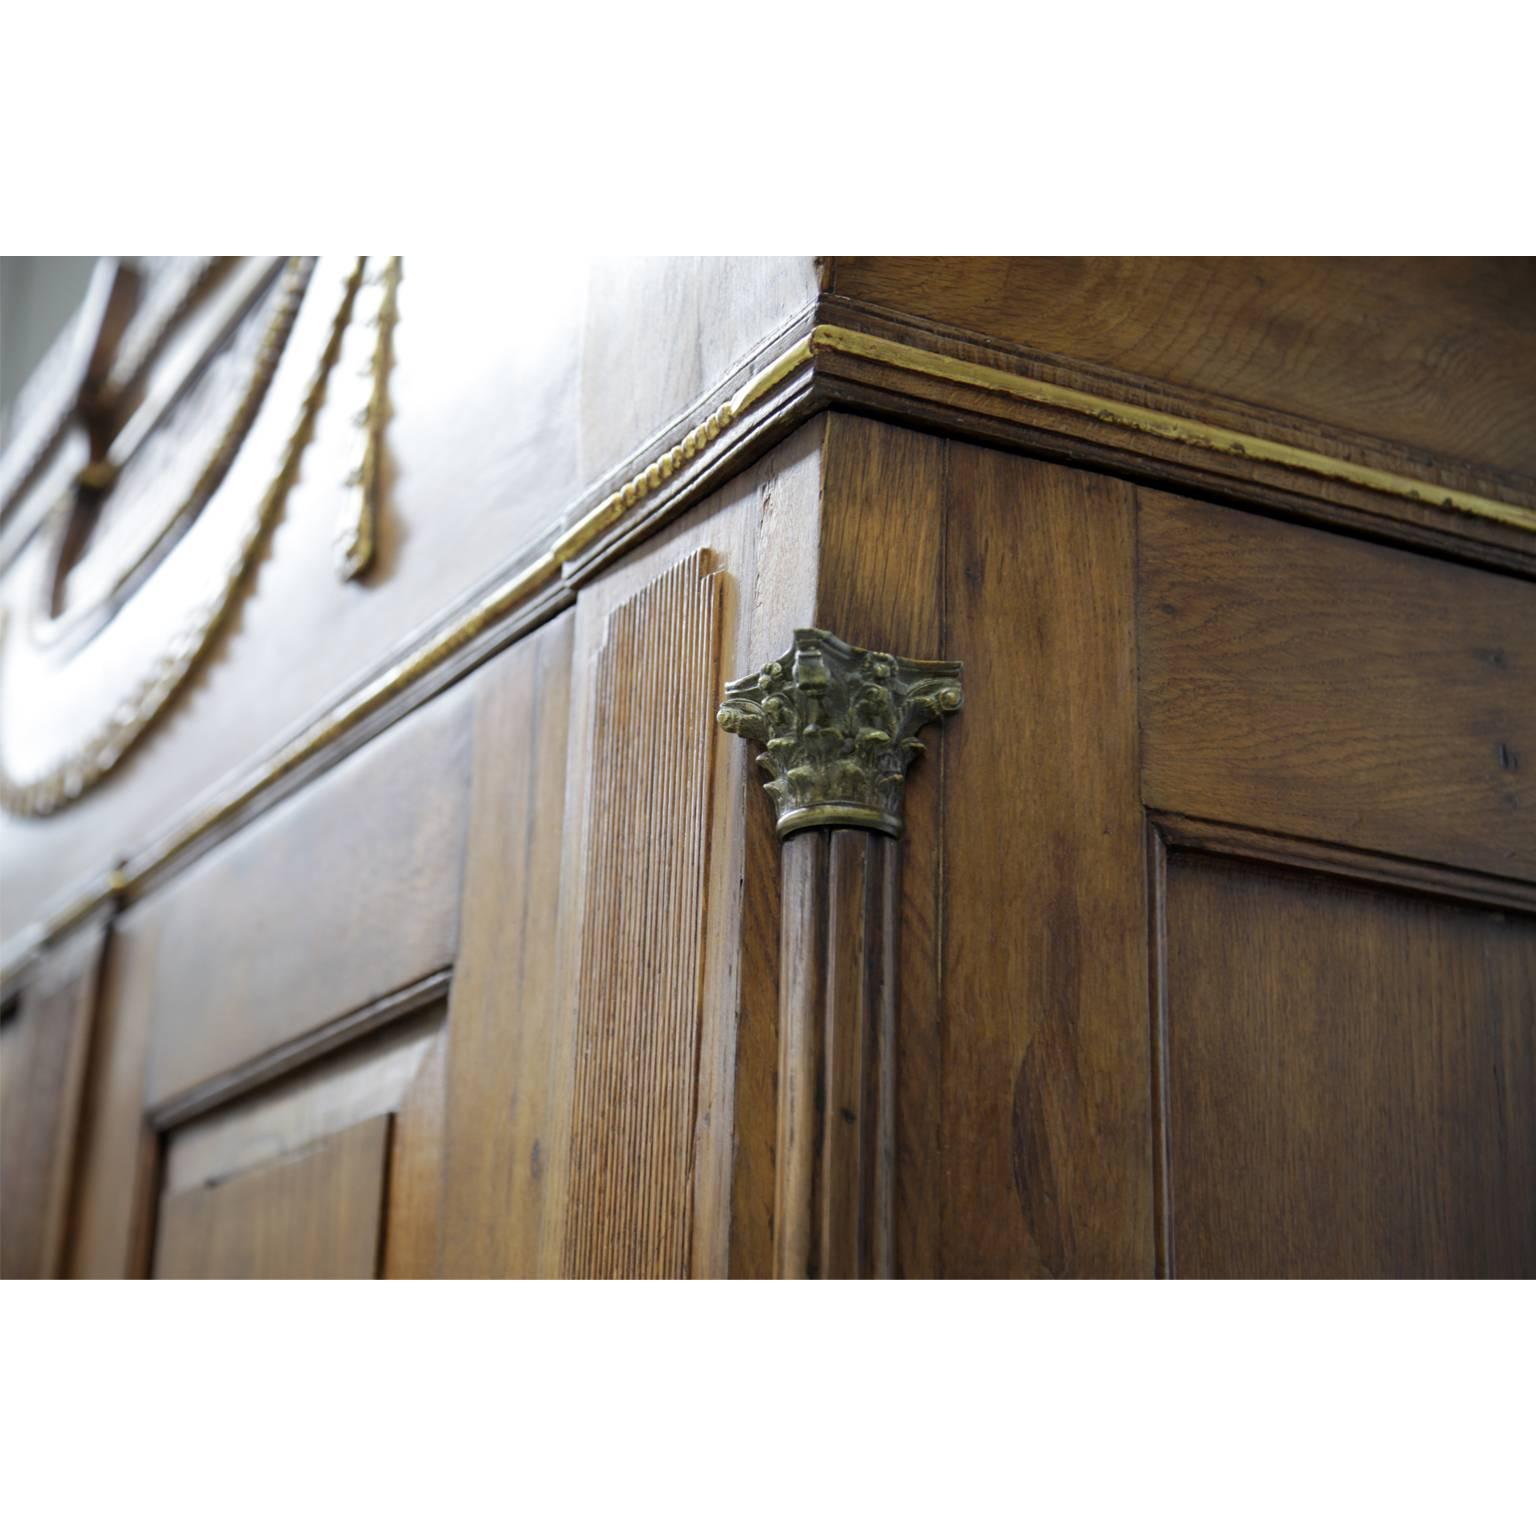 Large two-doored oak cupboard with Corinthian columns on the corners and dentils on doors, pediment and skirt. The pediment shows carved ornaments and two urns. The gilding was restored.